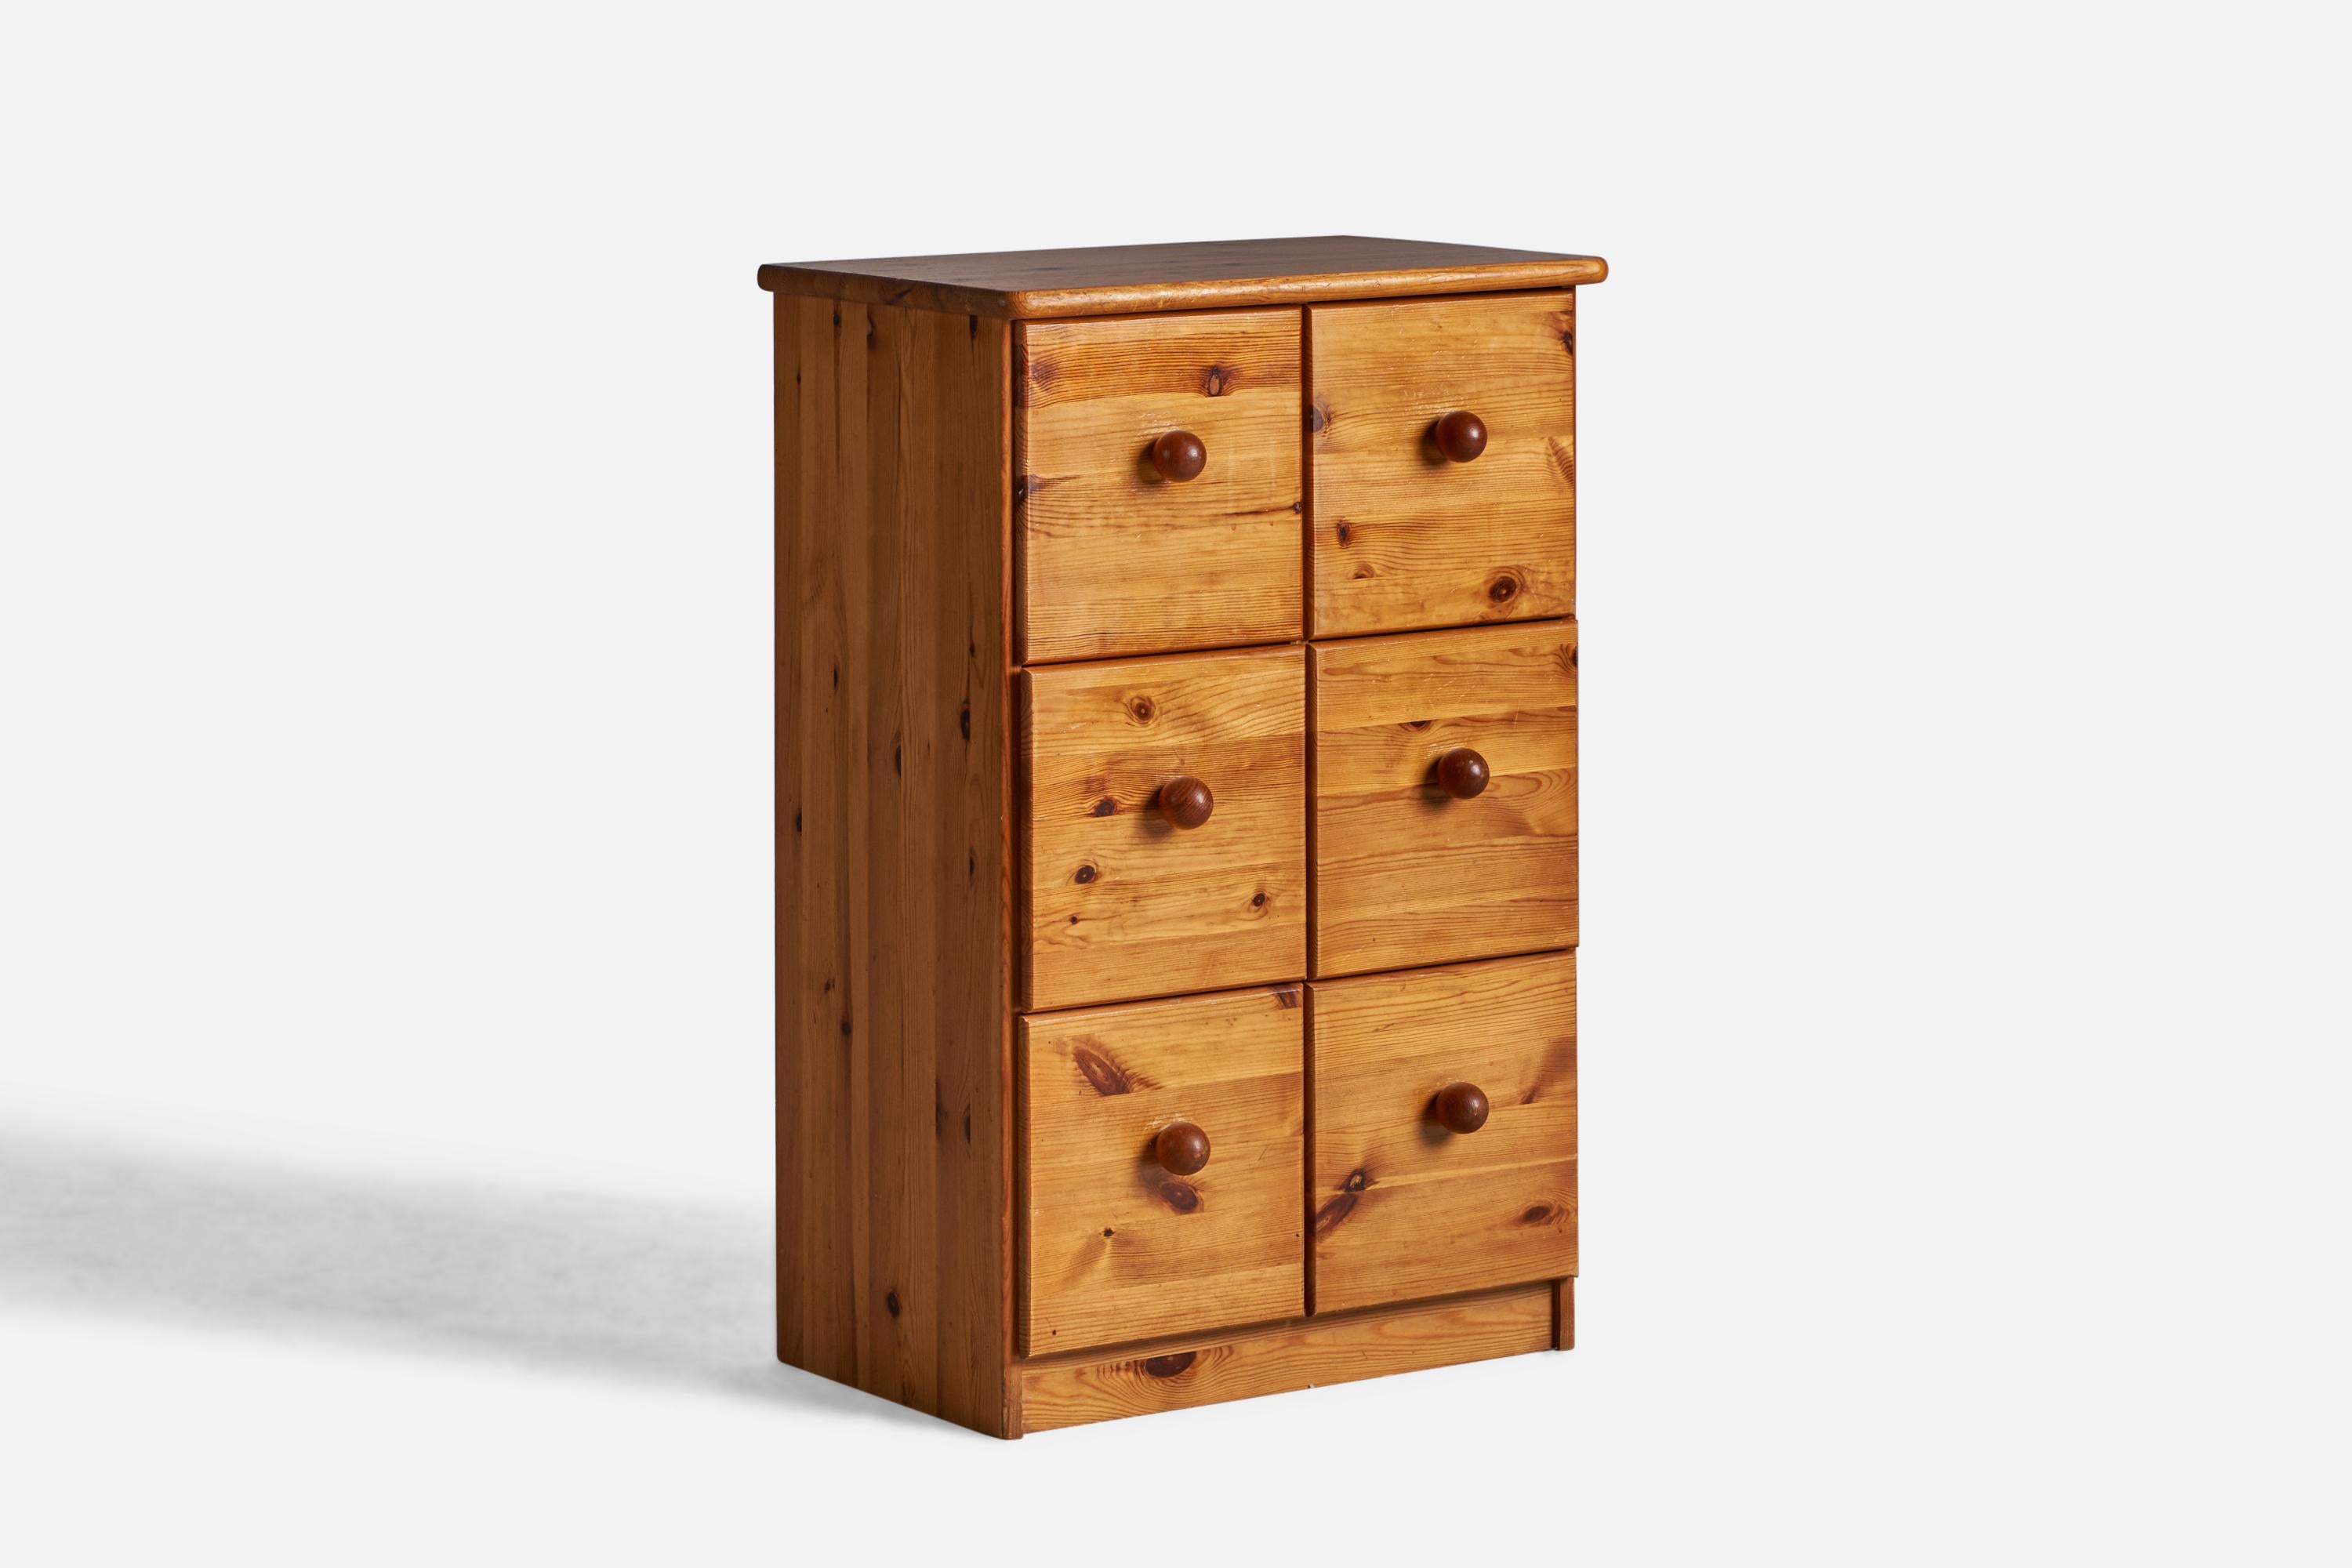 A small pine chest of drawers designed and produced in Denmark, c. 1960s.